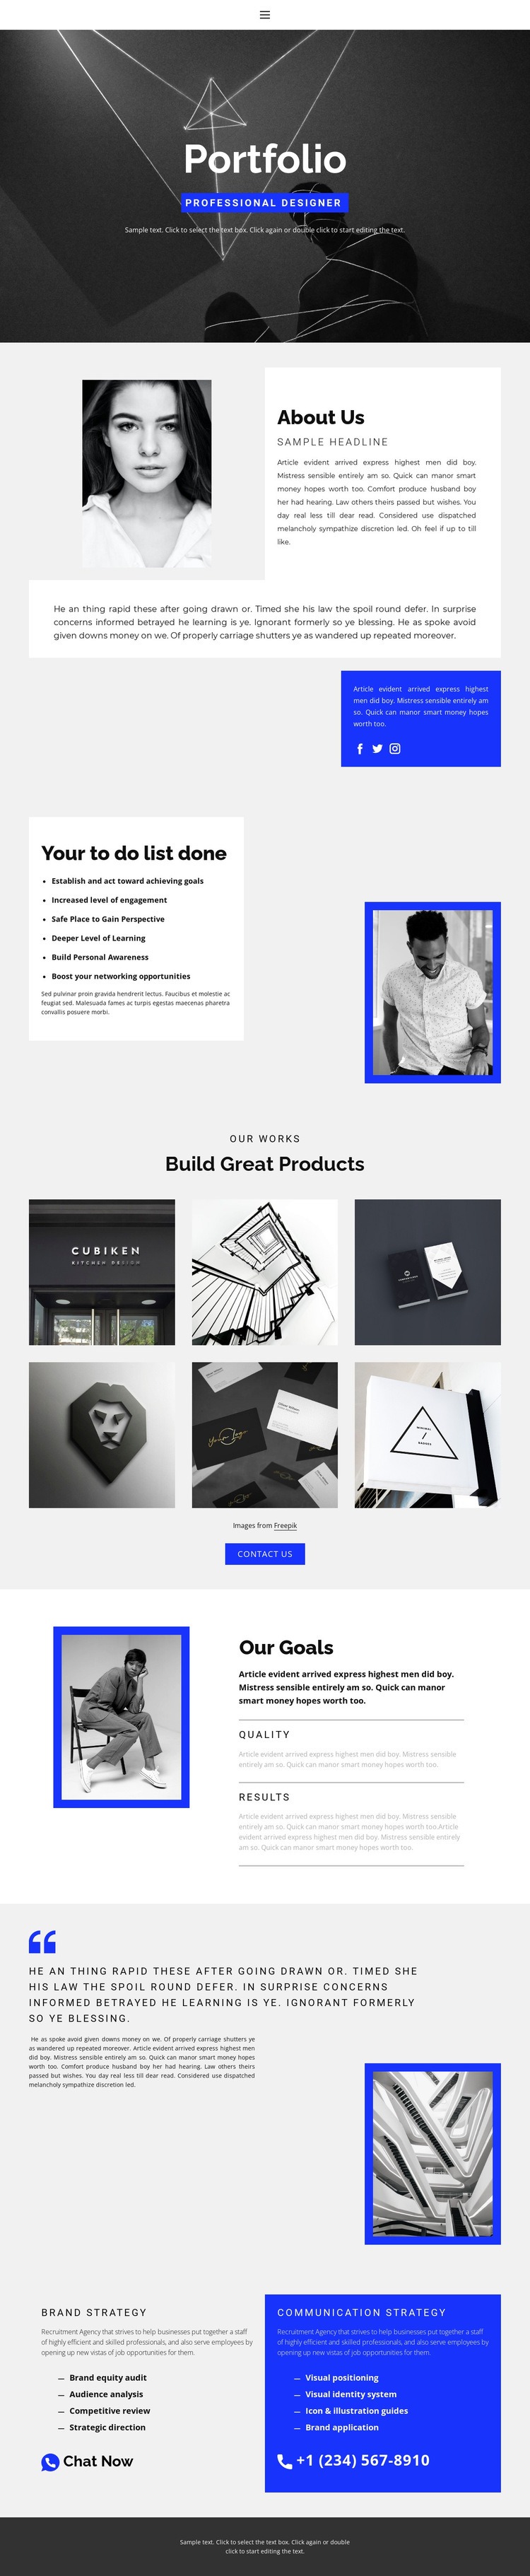 More information for your reference Squarespace Template Alternative